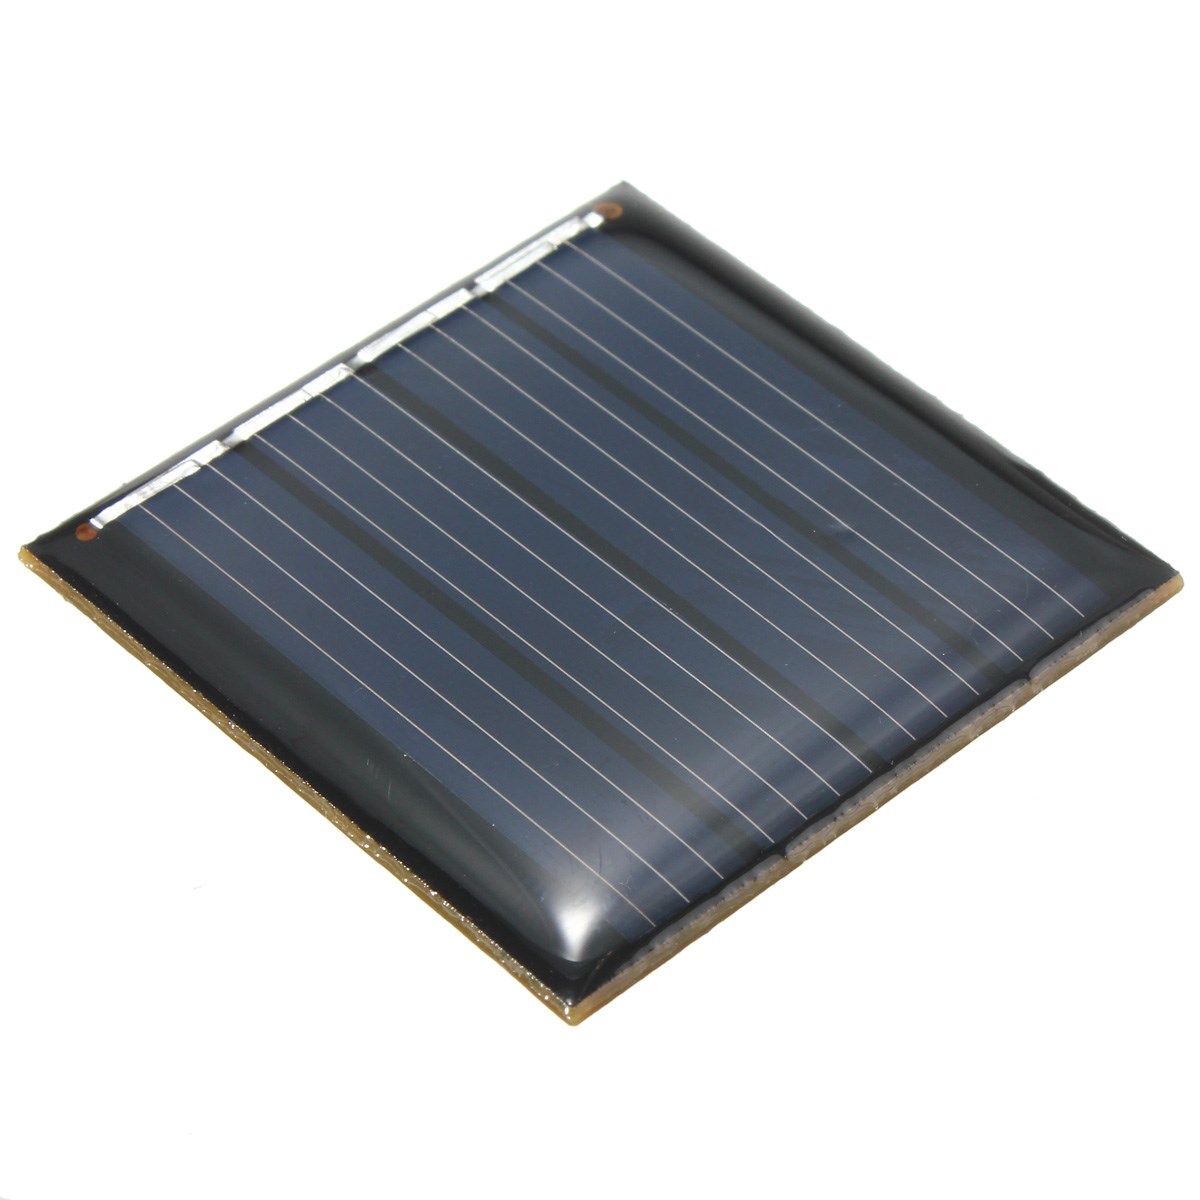 2V 0.14W Epoxy Battery Plate Polycrystalline Silicon Cell Batteries DIY Solar Powered Panels Solar Panel Cell Model 40 x 40x3mm 9